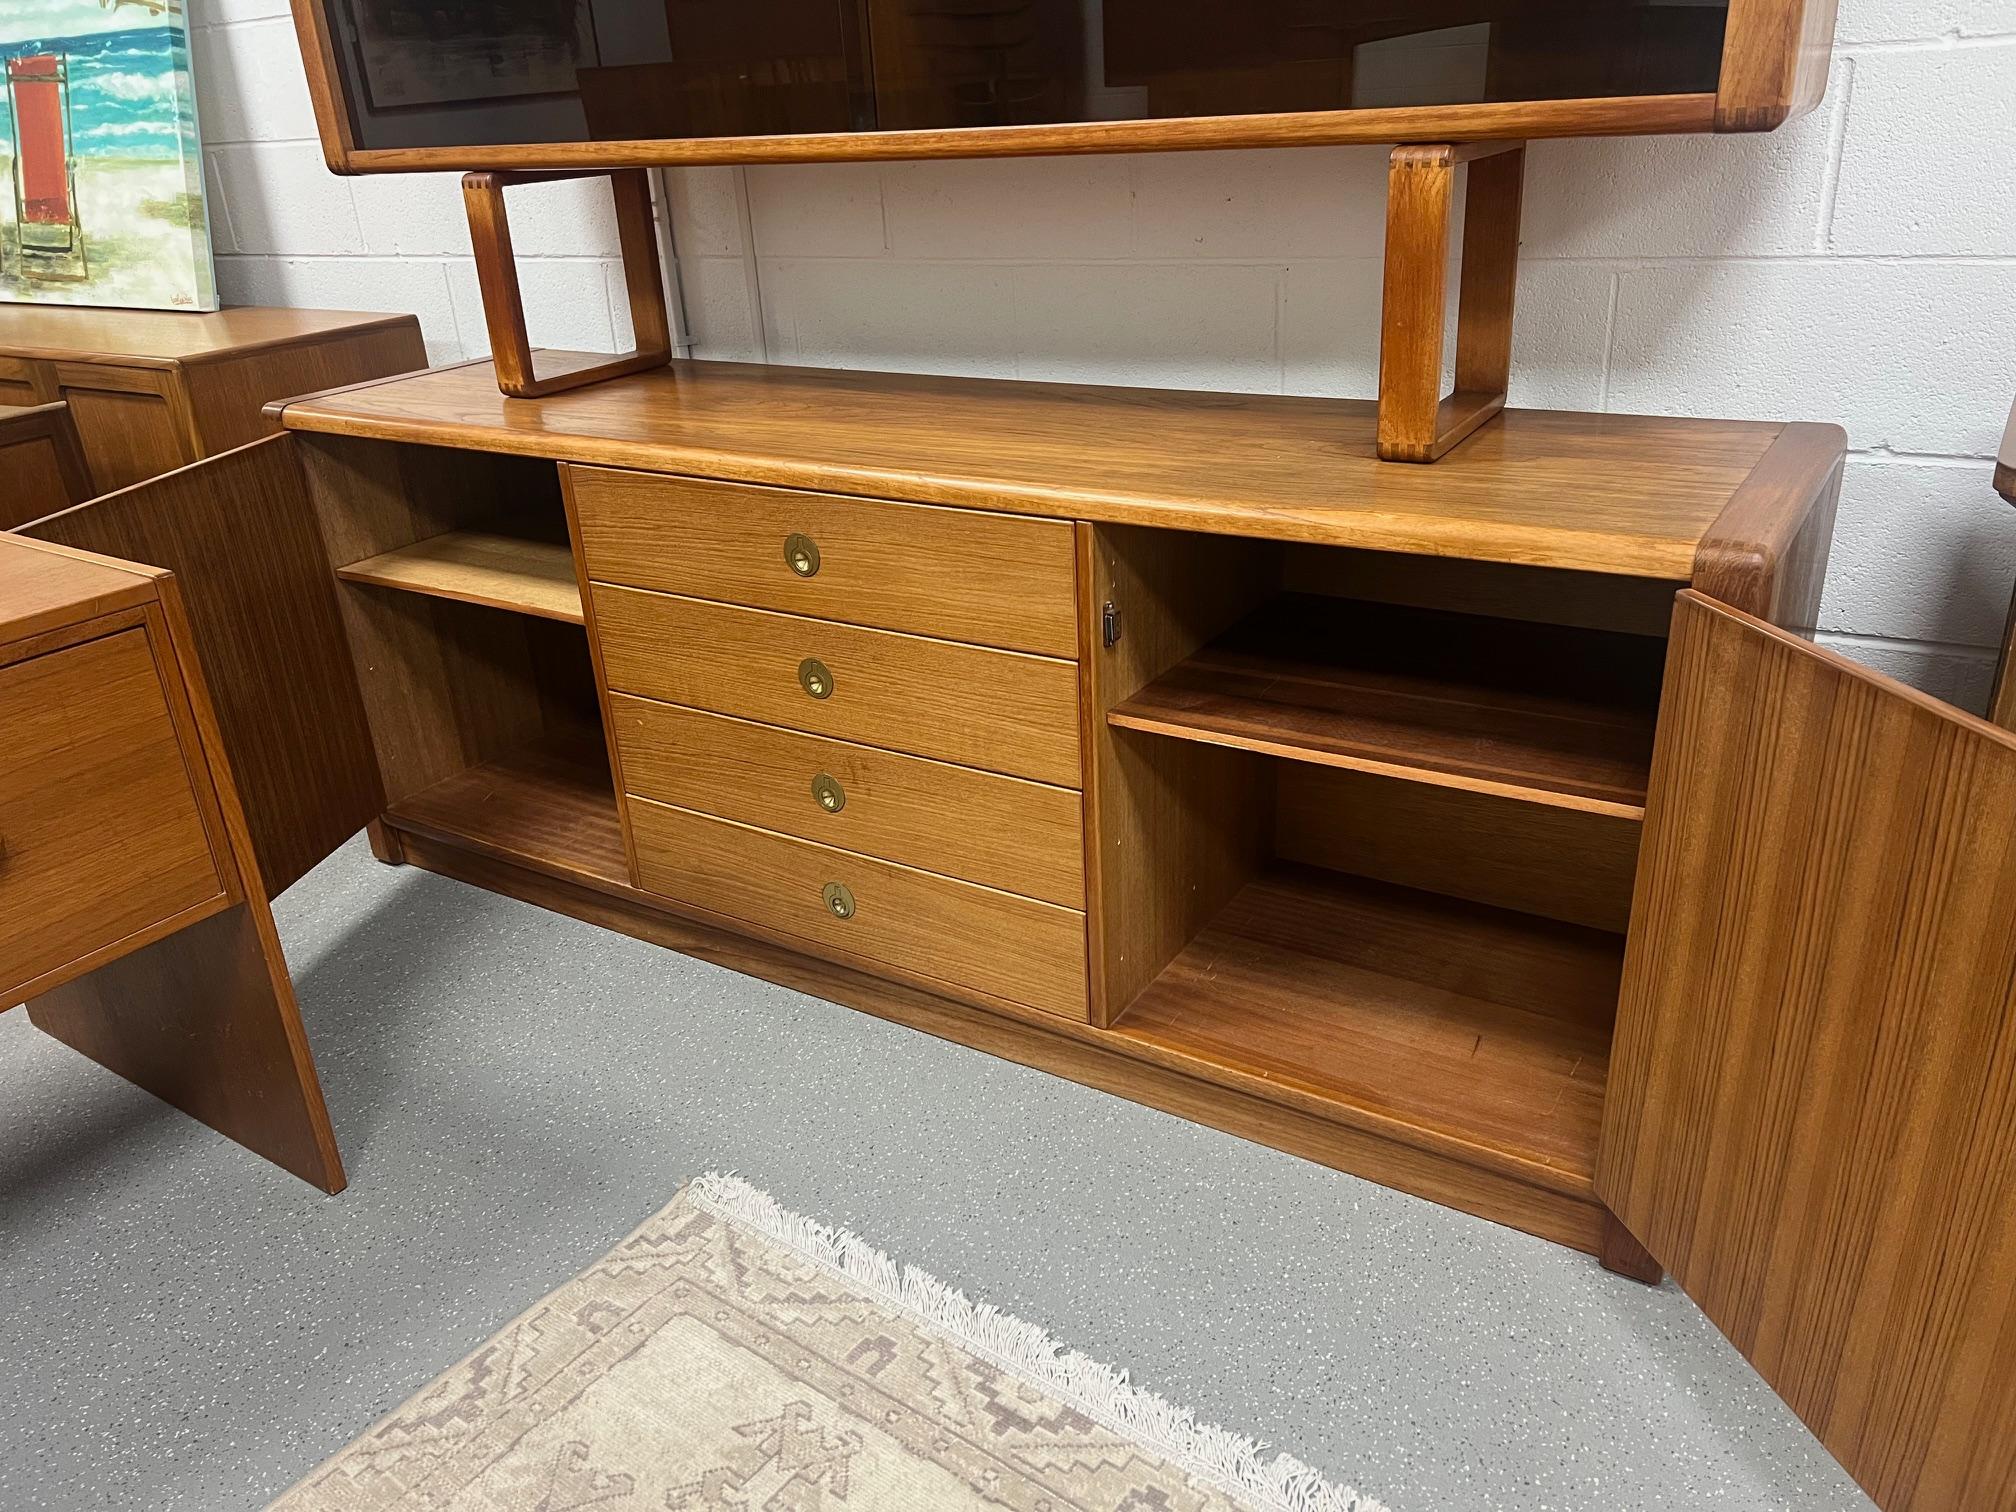 Outstanding teak credenza or buffet with hard to find top hutch by D-Scan. Model Captain Line. Lots of storage. Adjustable shelves. Brass handles. The top is removable. Very good condition. Clean drawers all open and close well. Some minor marks